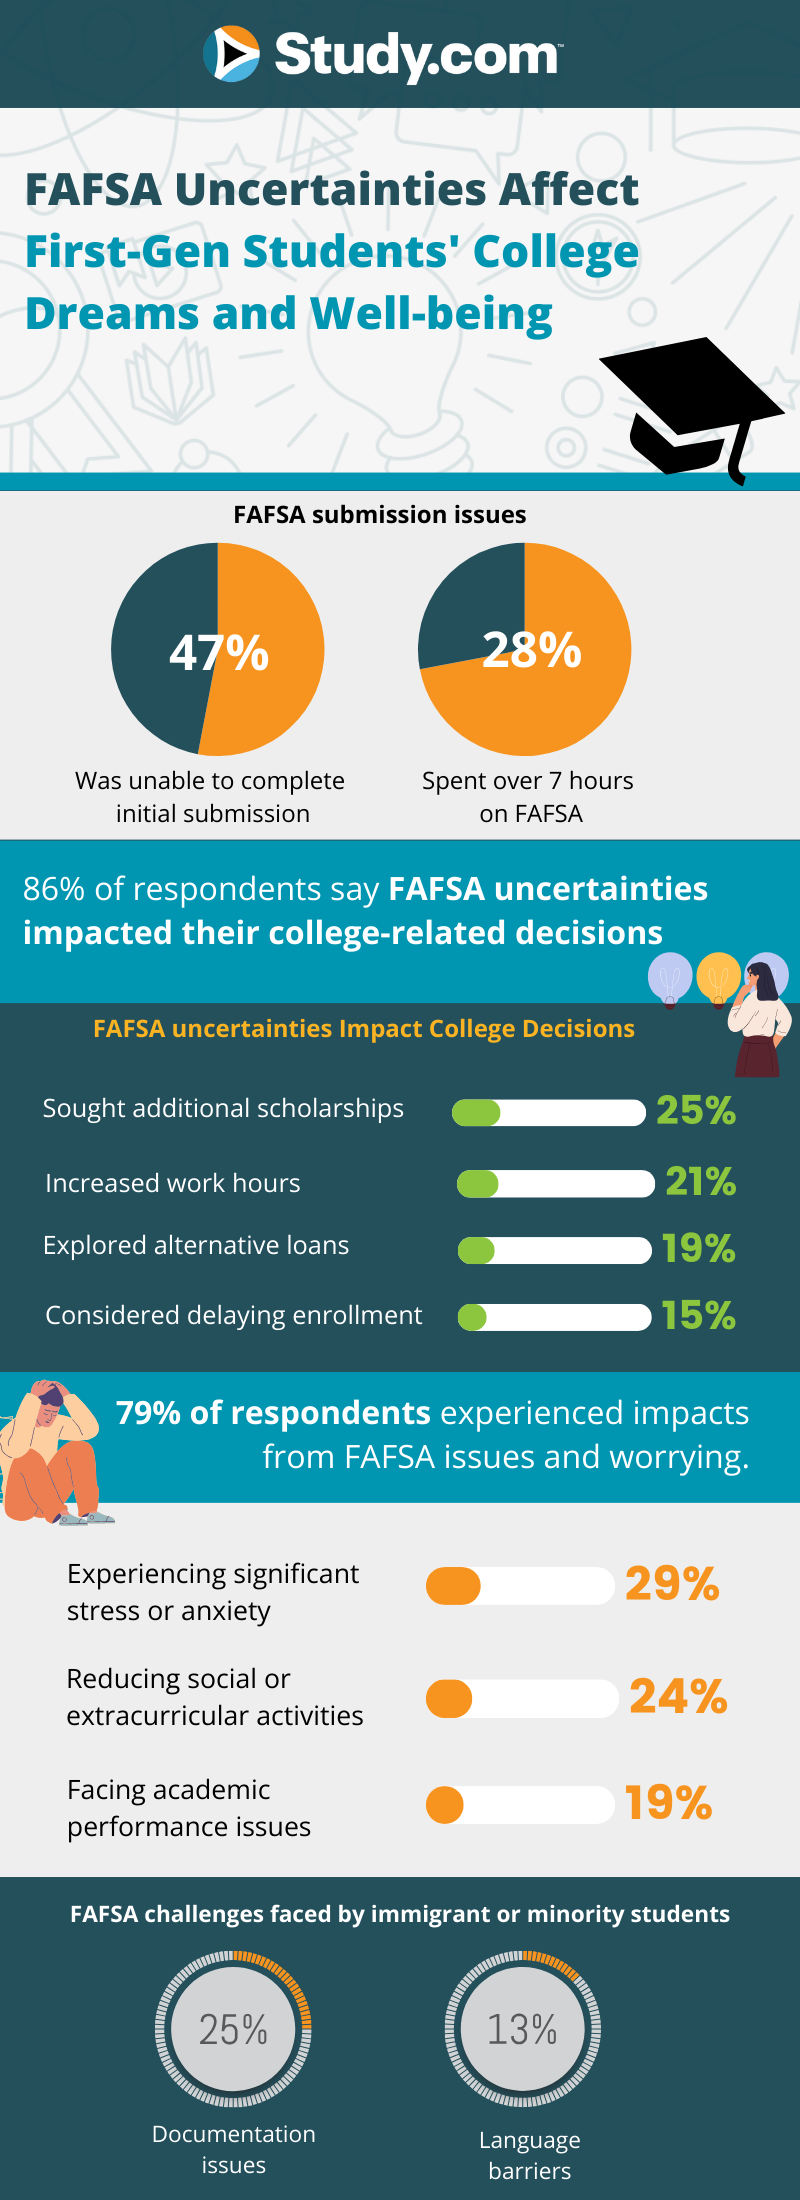 Infographic showing how FAFSA uncertainties affect first generation students.